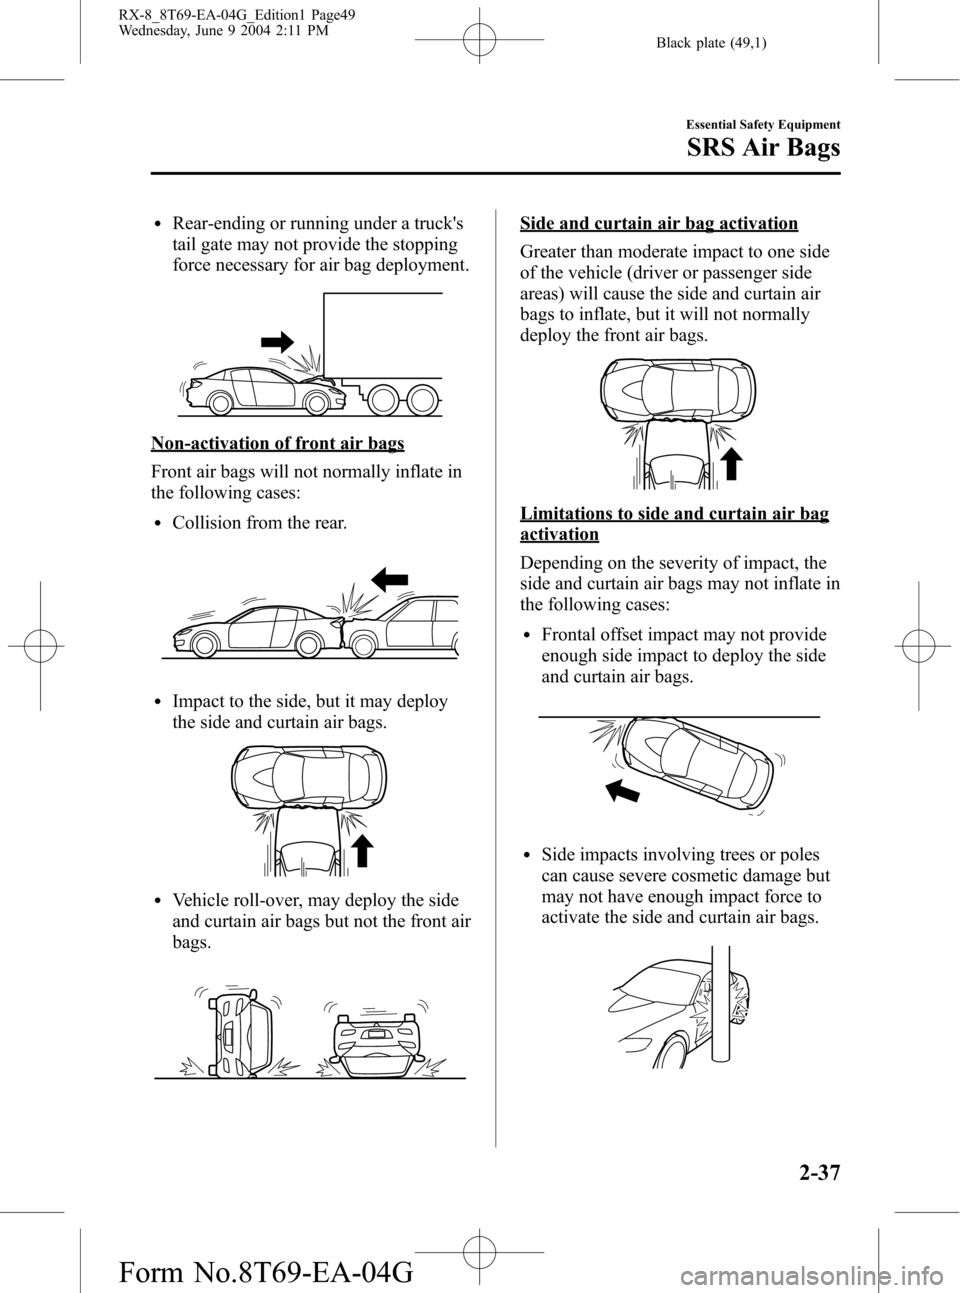 MAZDA MODEL RX 8 2005   (in English) Service Manual Black plate (49,1)
lRear-ending or running under a trucks
tail gate may not provide the stopping
force necessary for air bag deployment.
Non-activation of front air bags
Front air bags will not norma